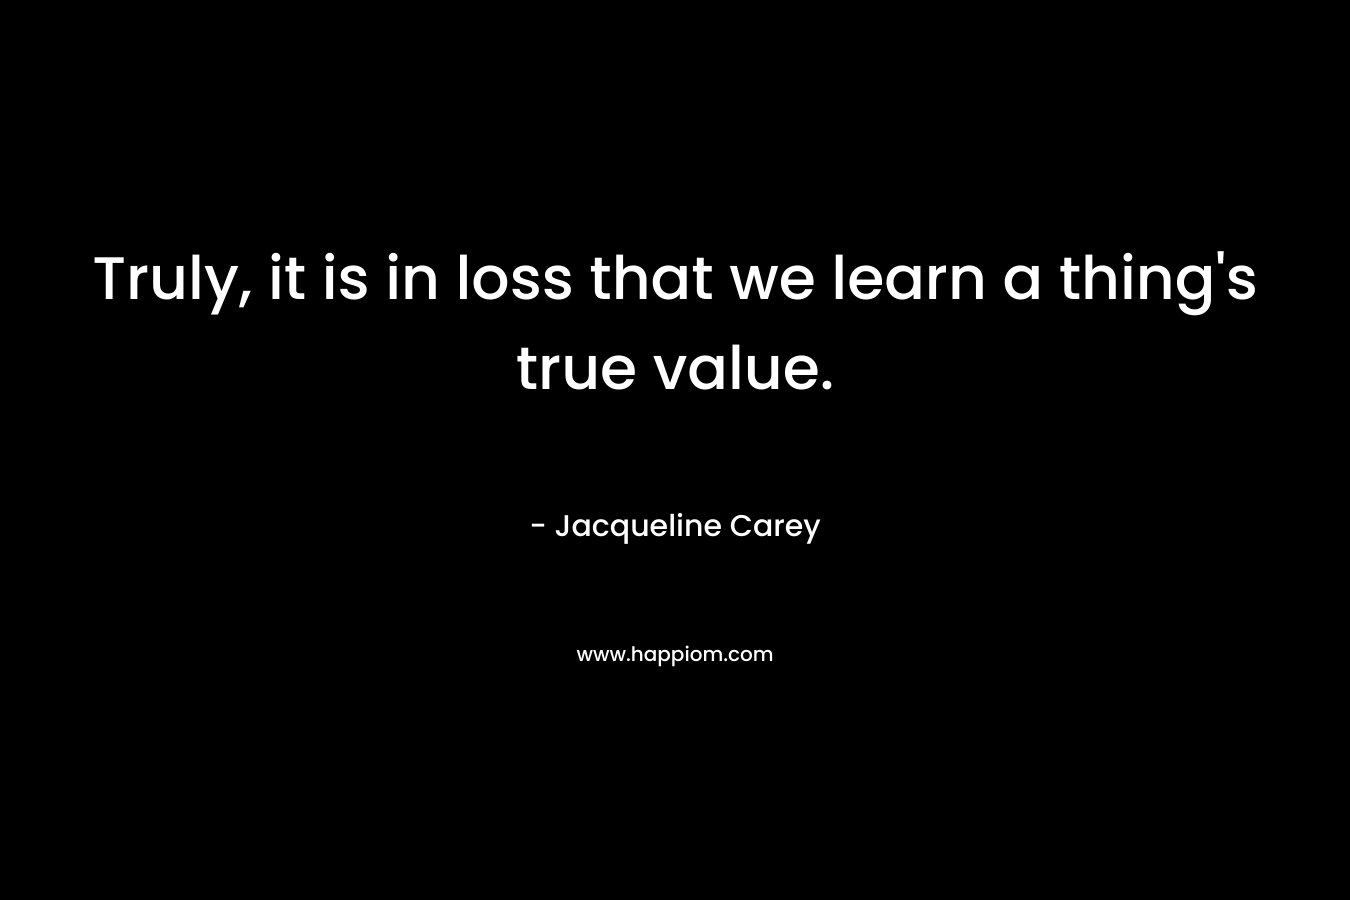 Truly, it is in loss that we learn a thing’s true value. – Jacqueline Carey